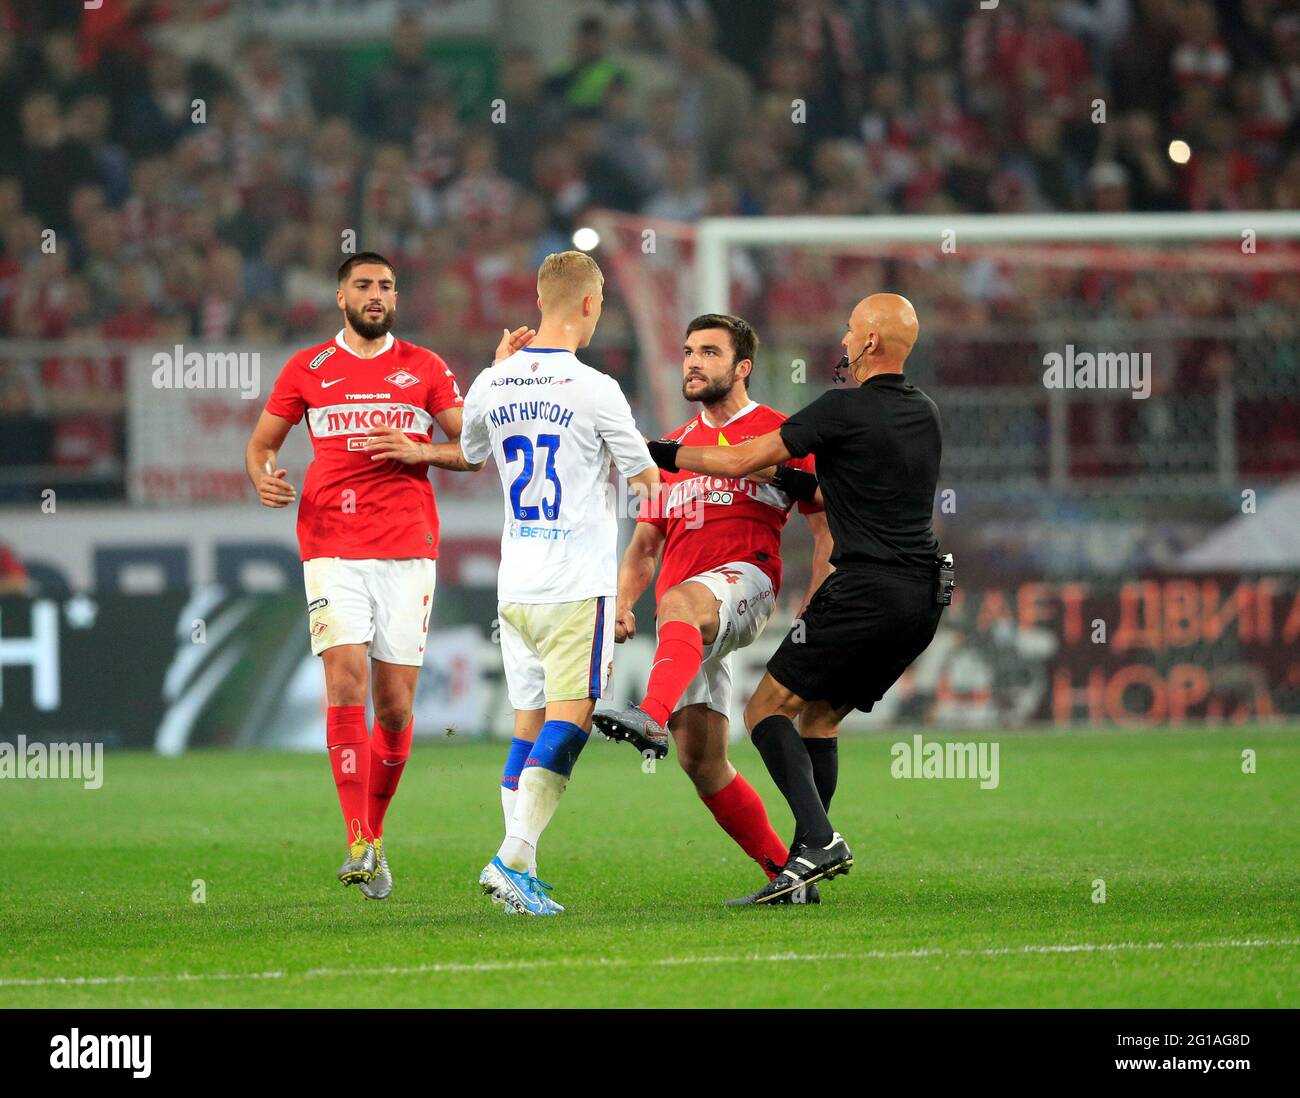 MOSCOW, RUSSIA - AUGUST 19, 2019: The 2019/20 Russian Football Premier  League. Round 6. Football match between Spartak (Moscow) vs CSKA (Moscow)  at Otkrytie Arena. Photo by Stupnikov Alexander/FC "Spartak Stock Photo -  Alamy